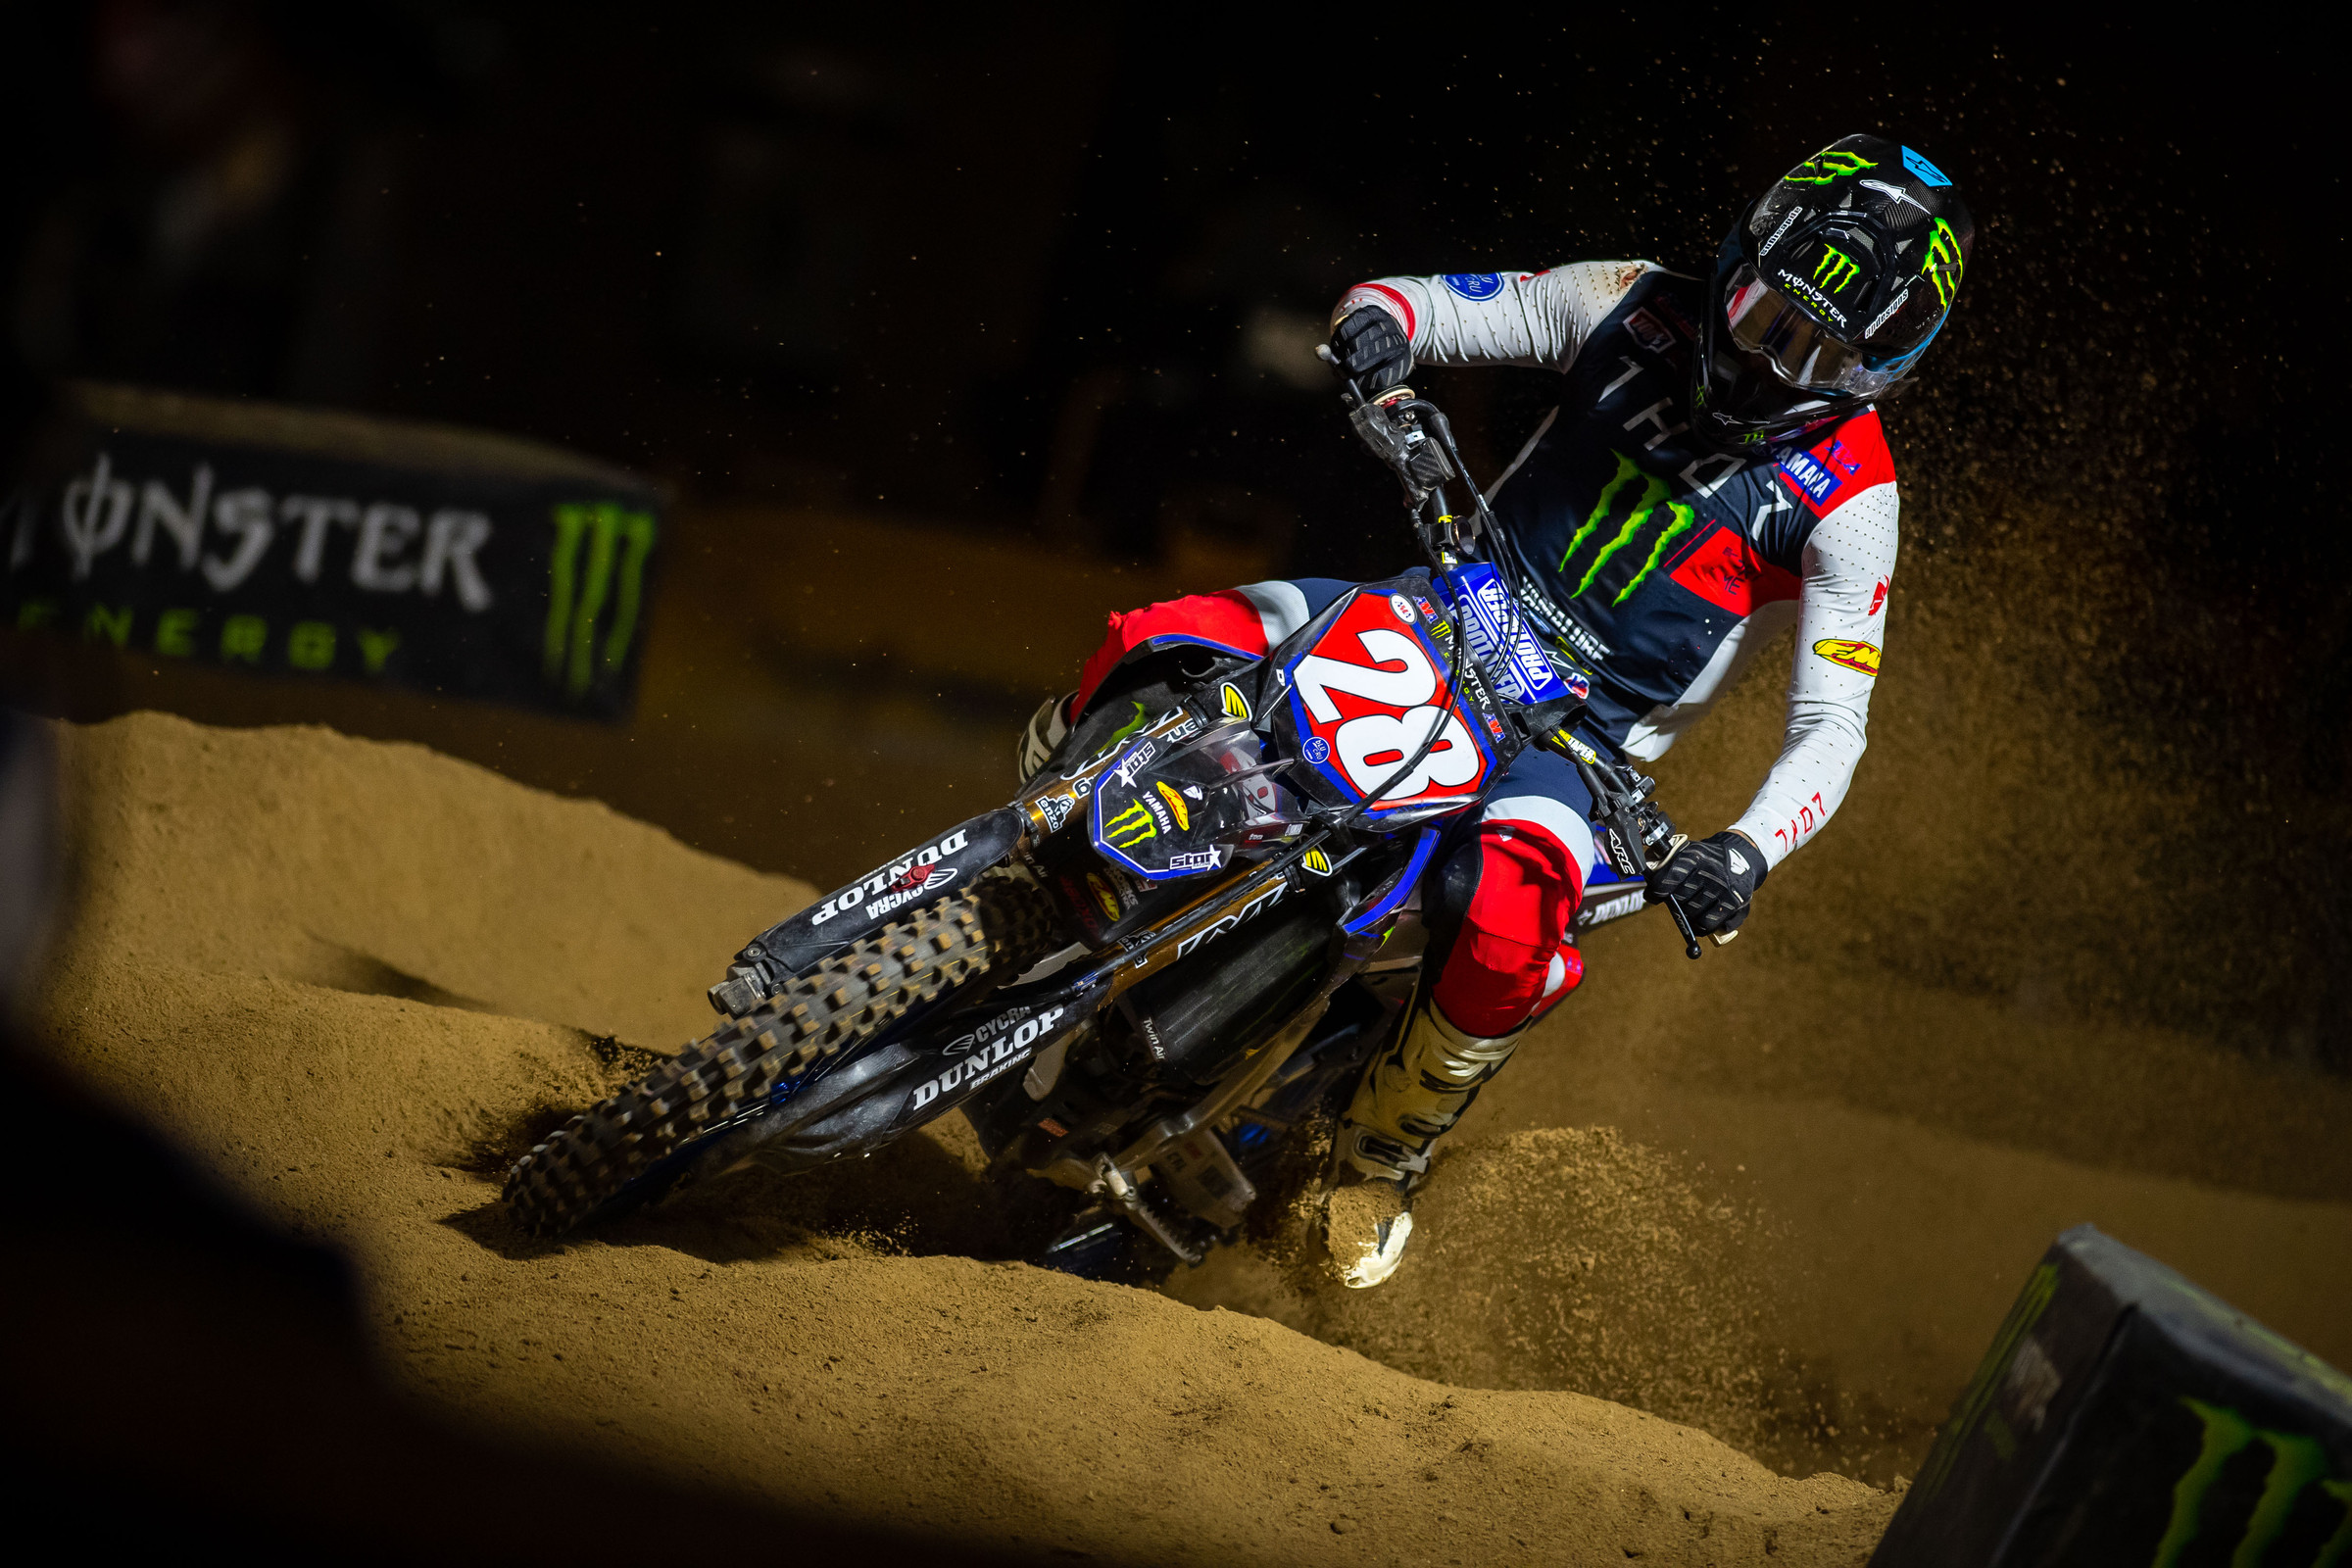 How to Stream and Watch 2022 Anaheim 3 Supercross on TV